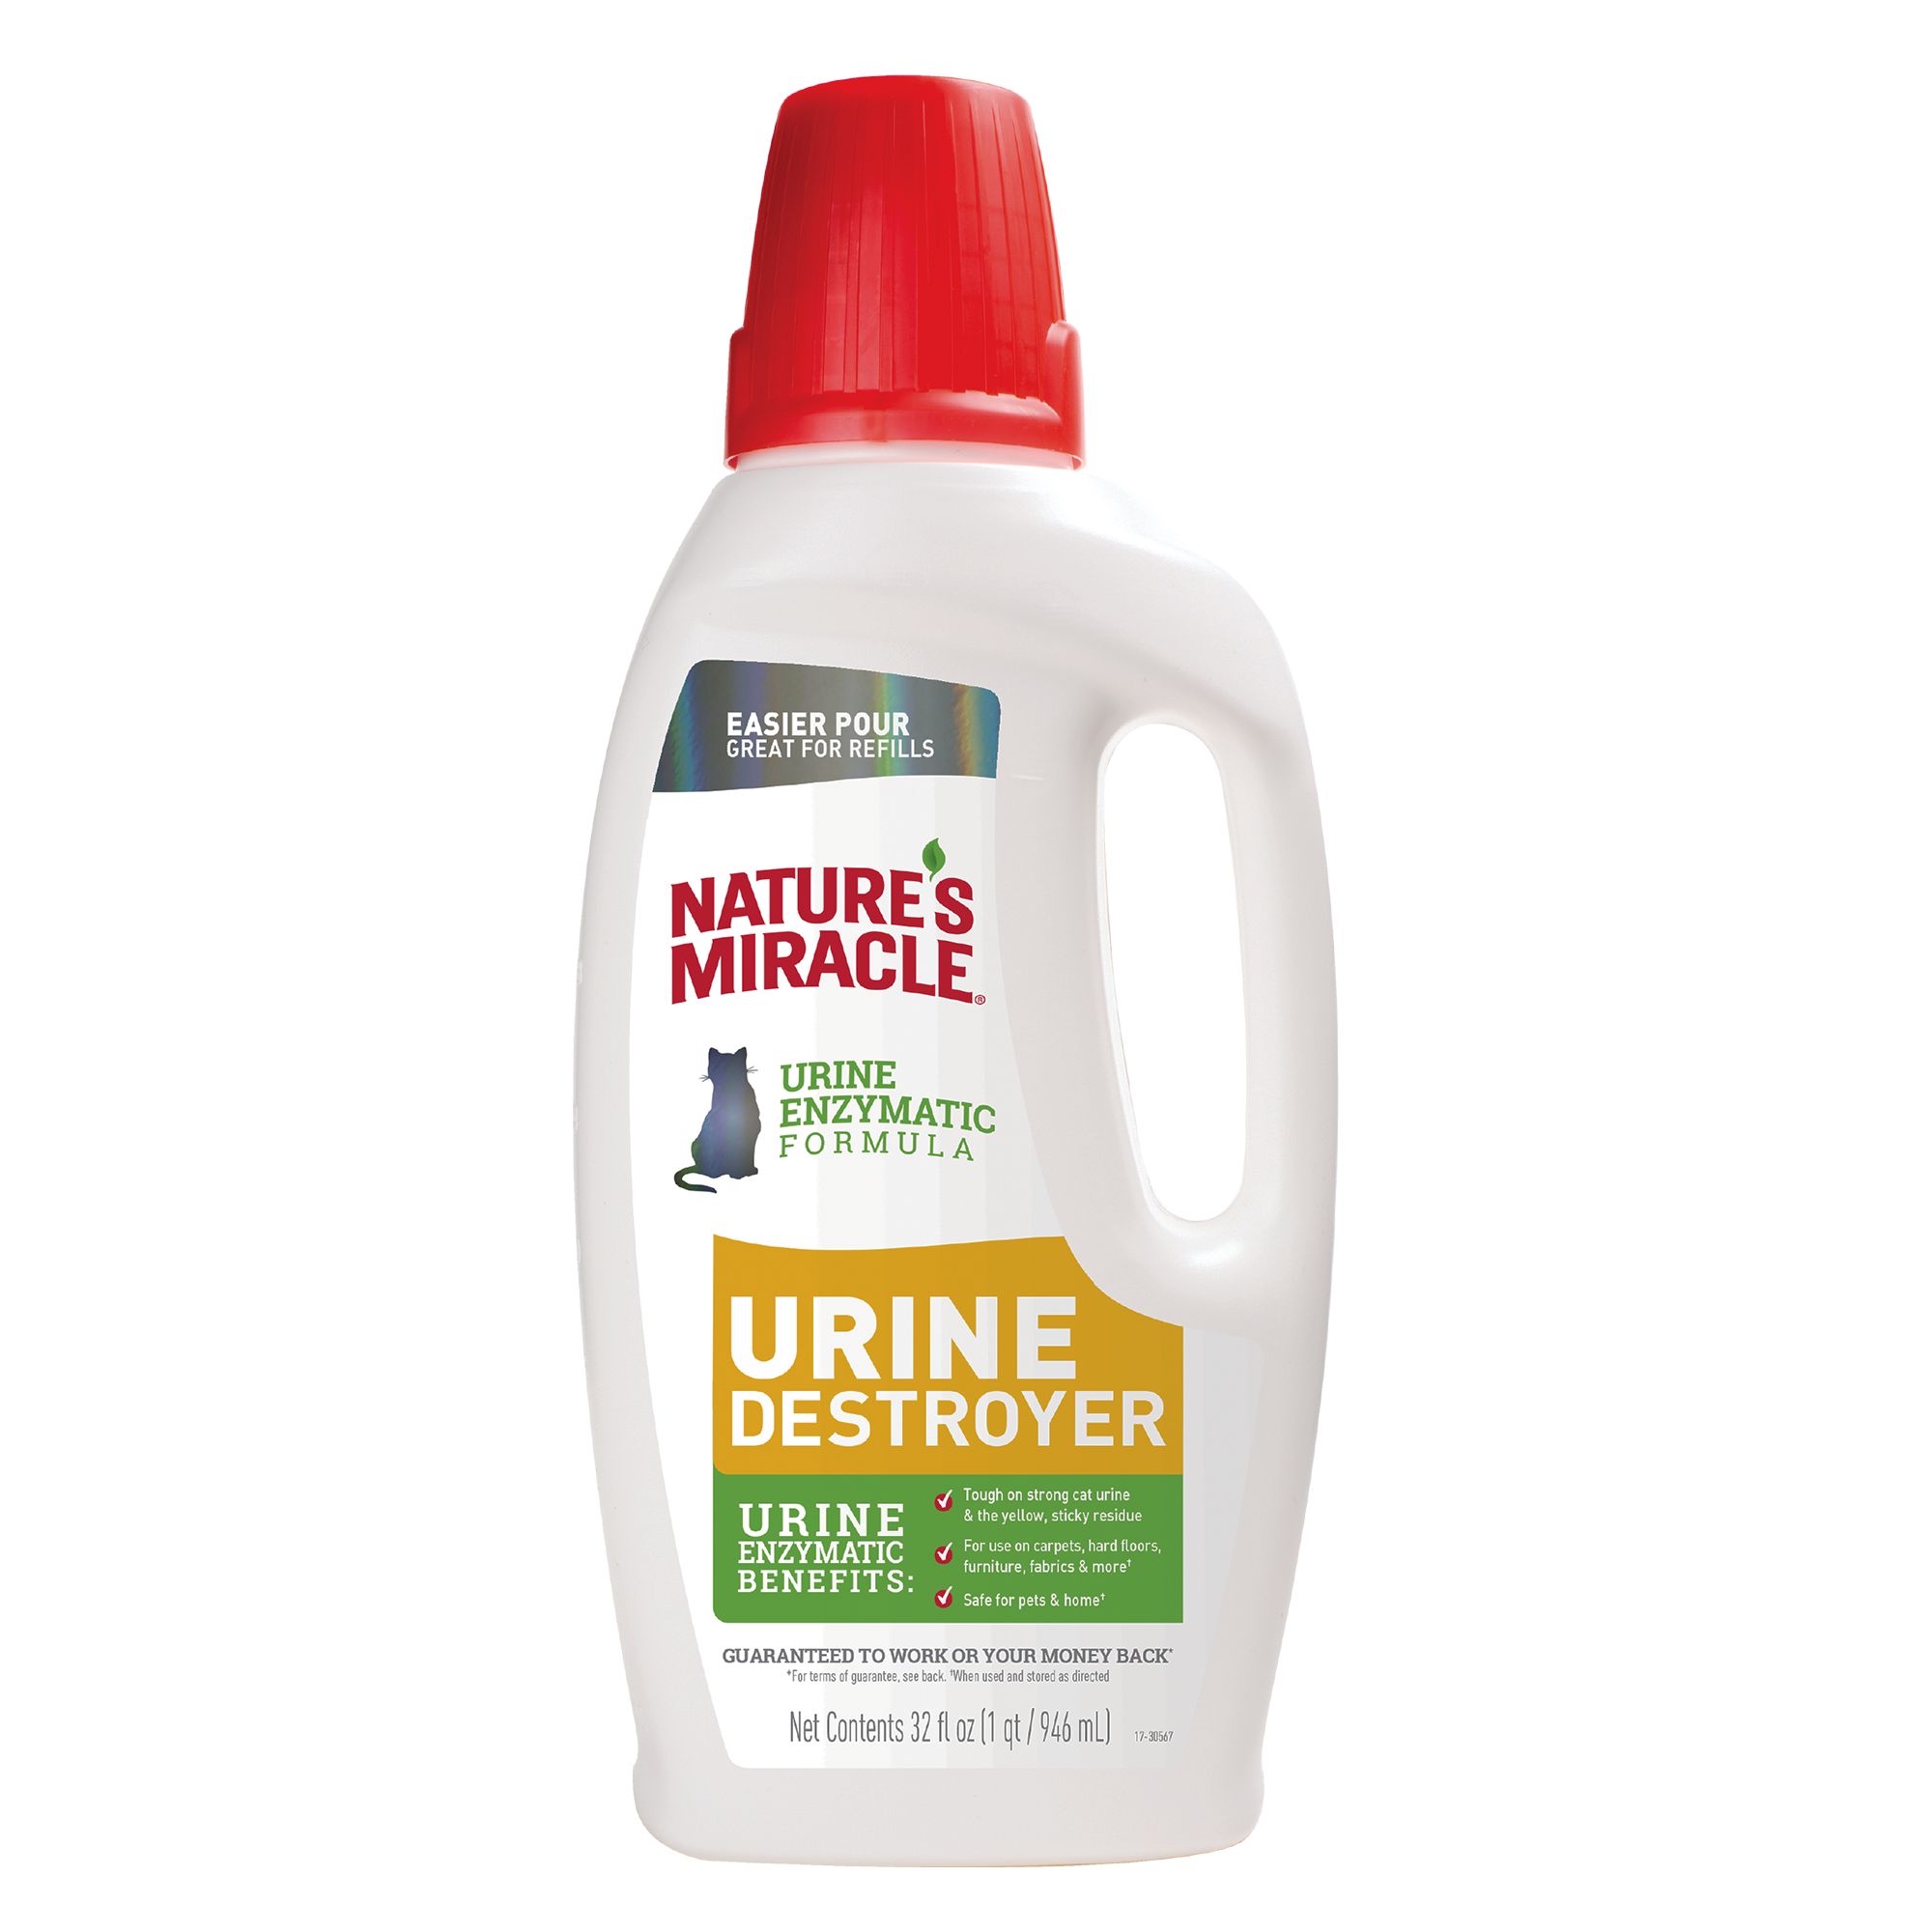 nature's miracle enzyme cleaner for cats